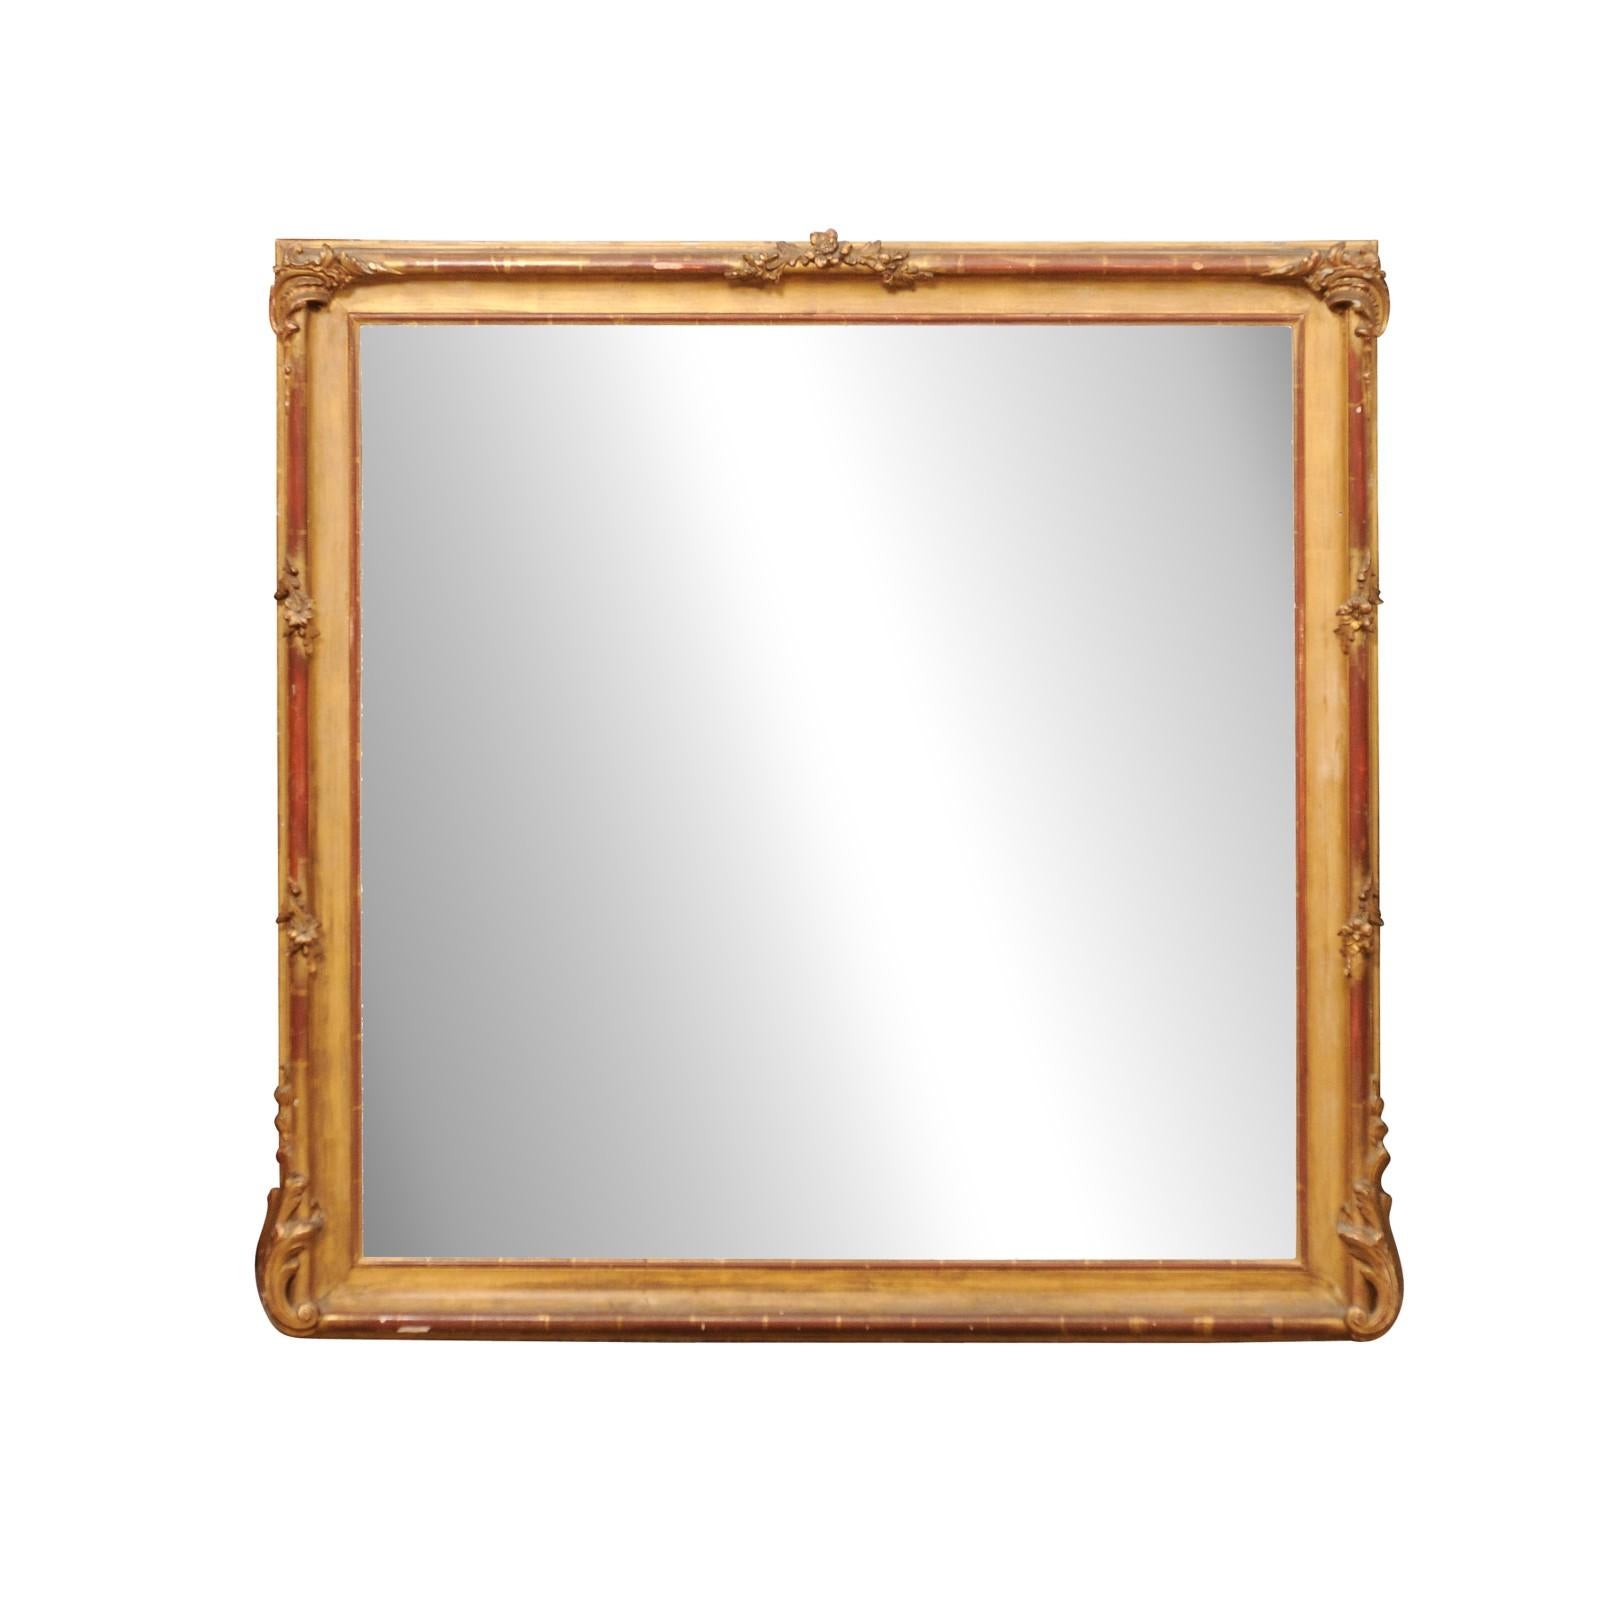 Rectangular Late 19th Century Continental Giltwood Mirror In Good Condition For Sale In Atlanta, GA